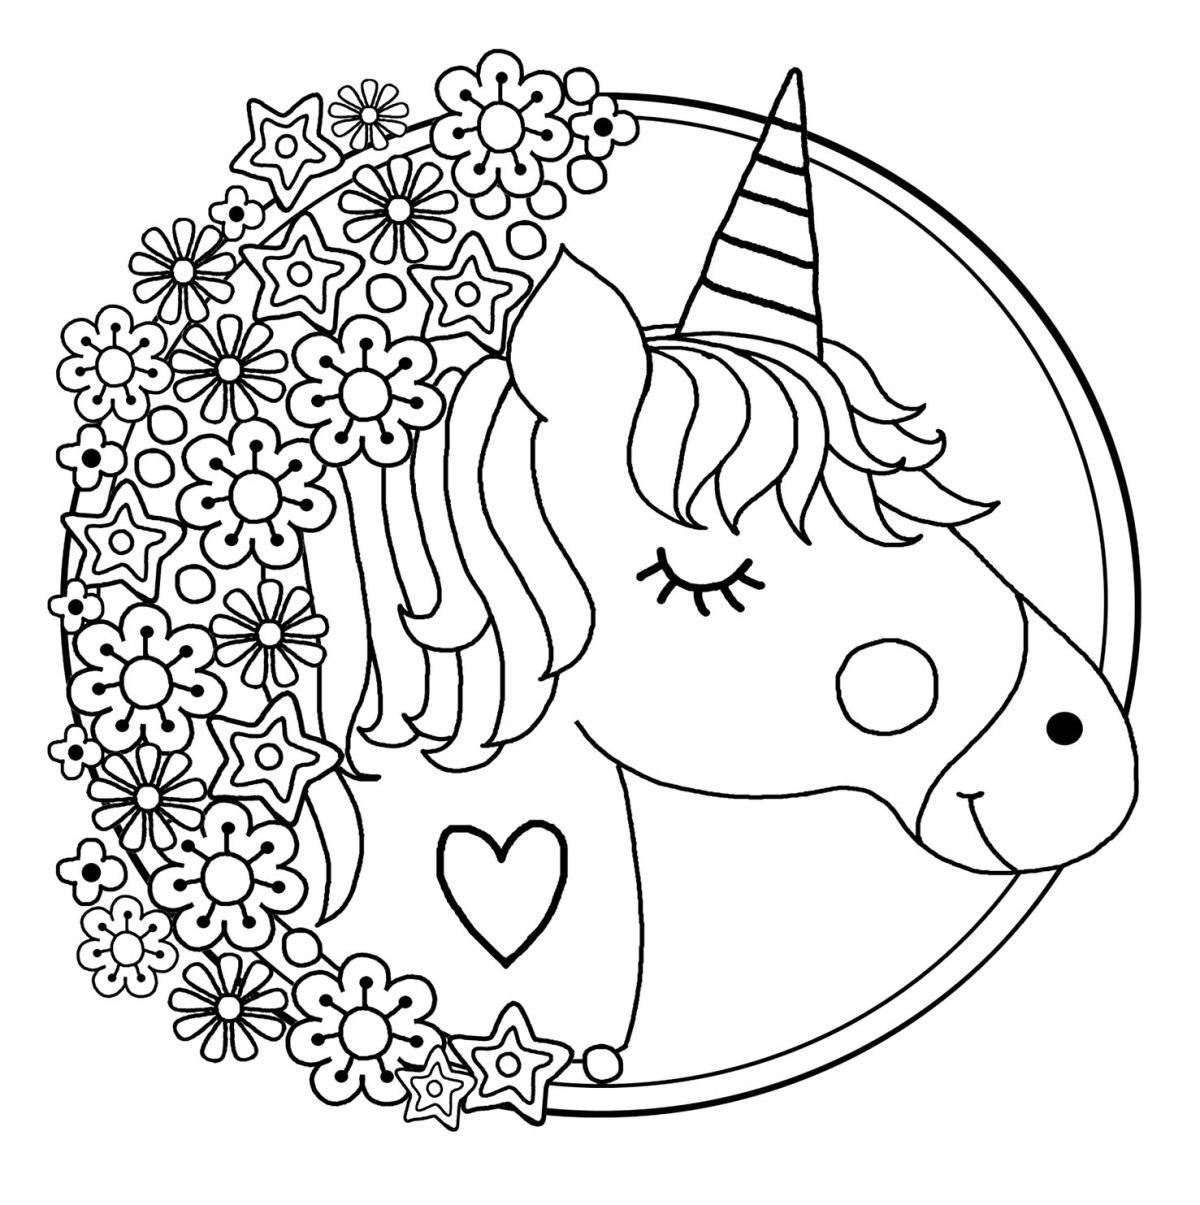 Magic unicorn coloring book for kids 4-5 years old